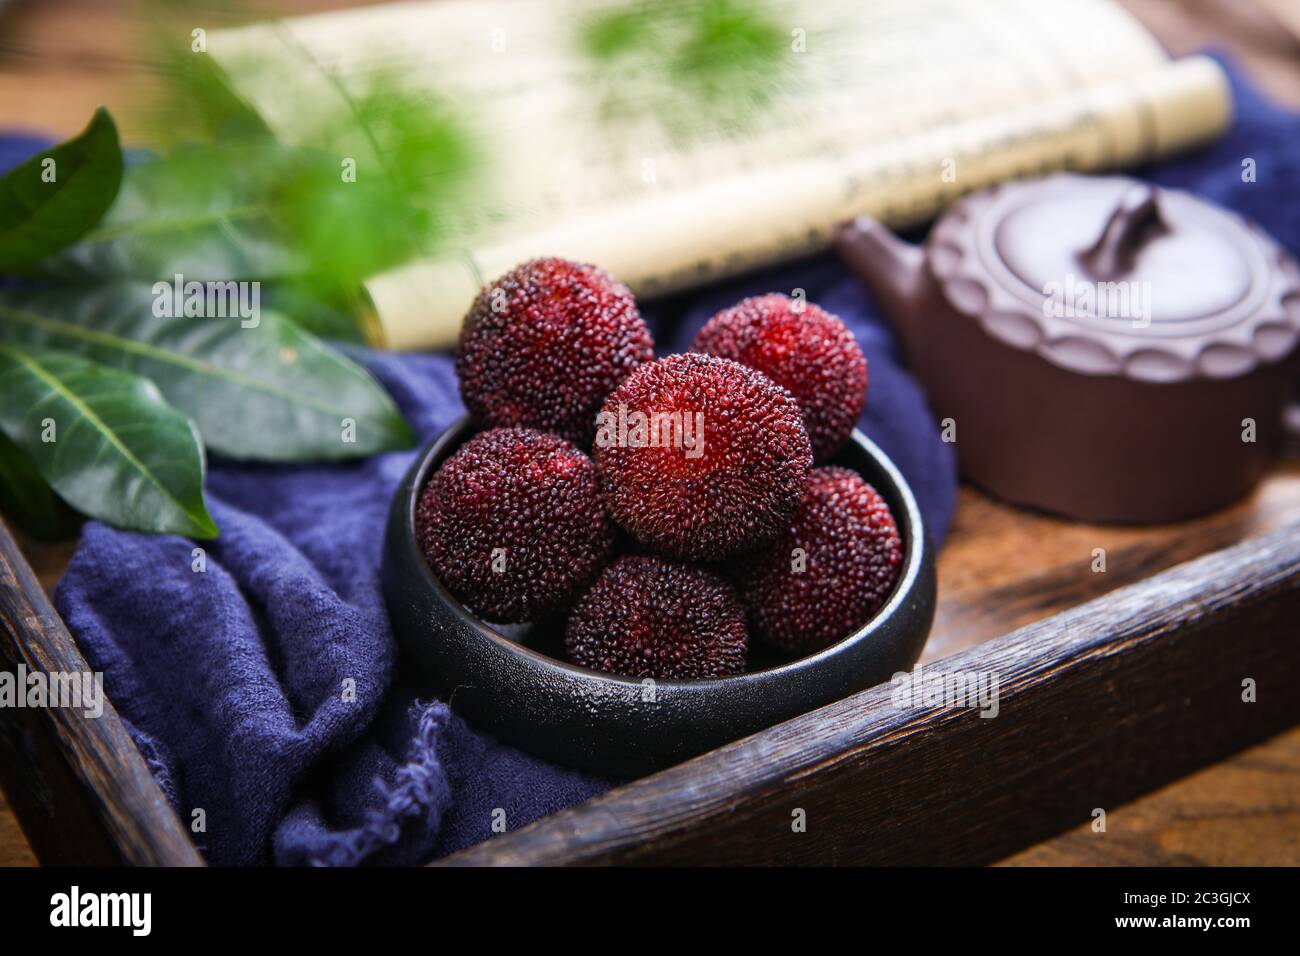 Yang mei afternoon tea hot drink nutrition Stock Photo